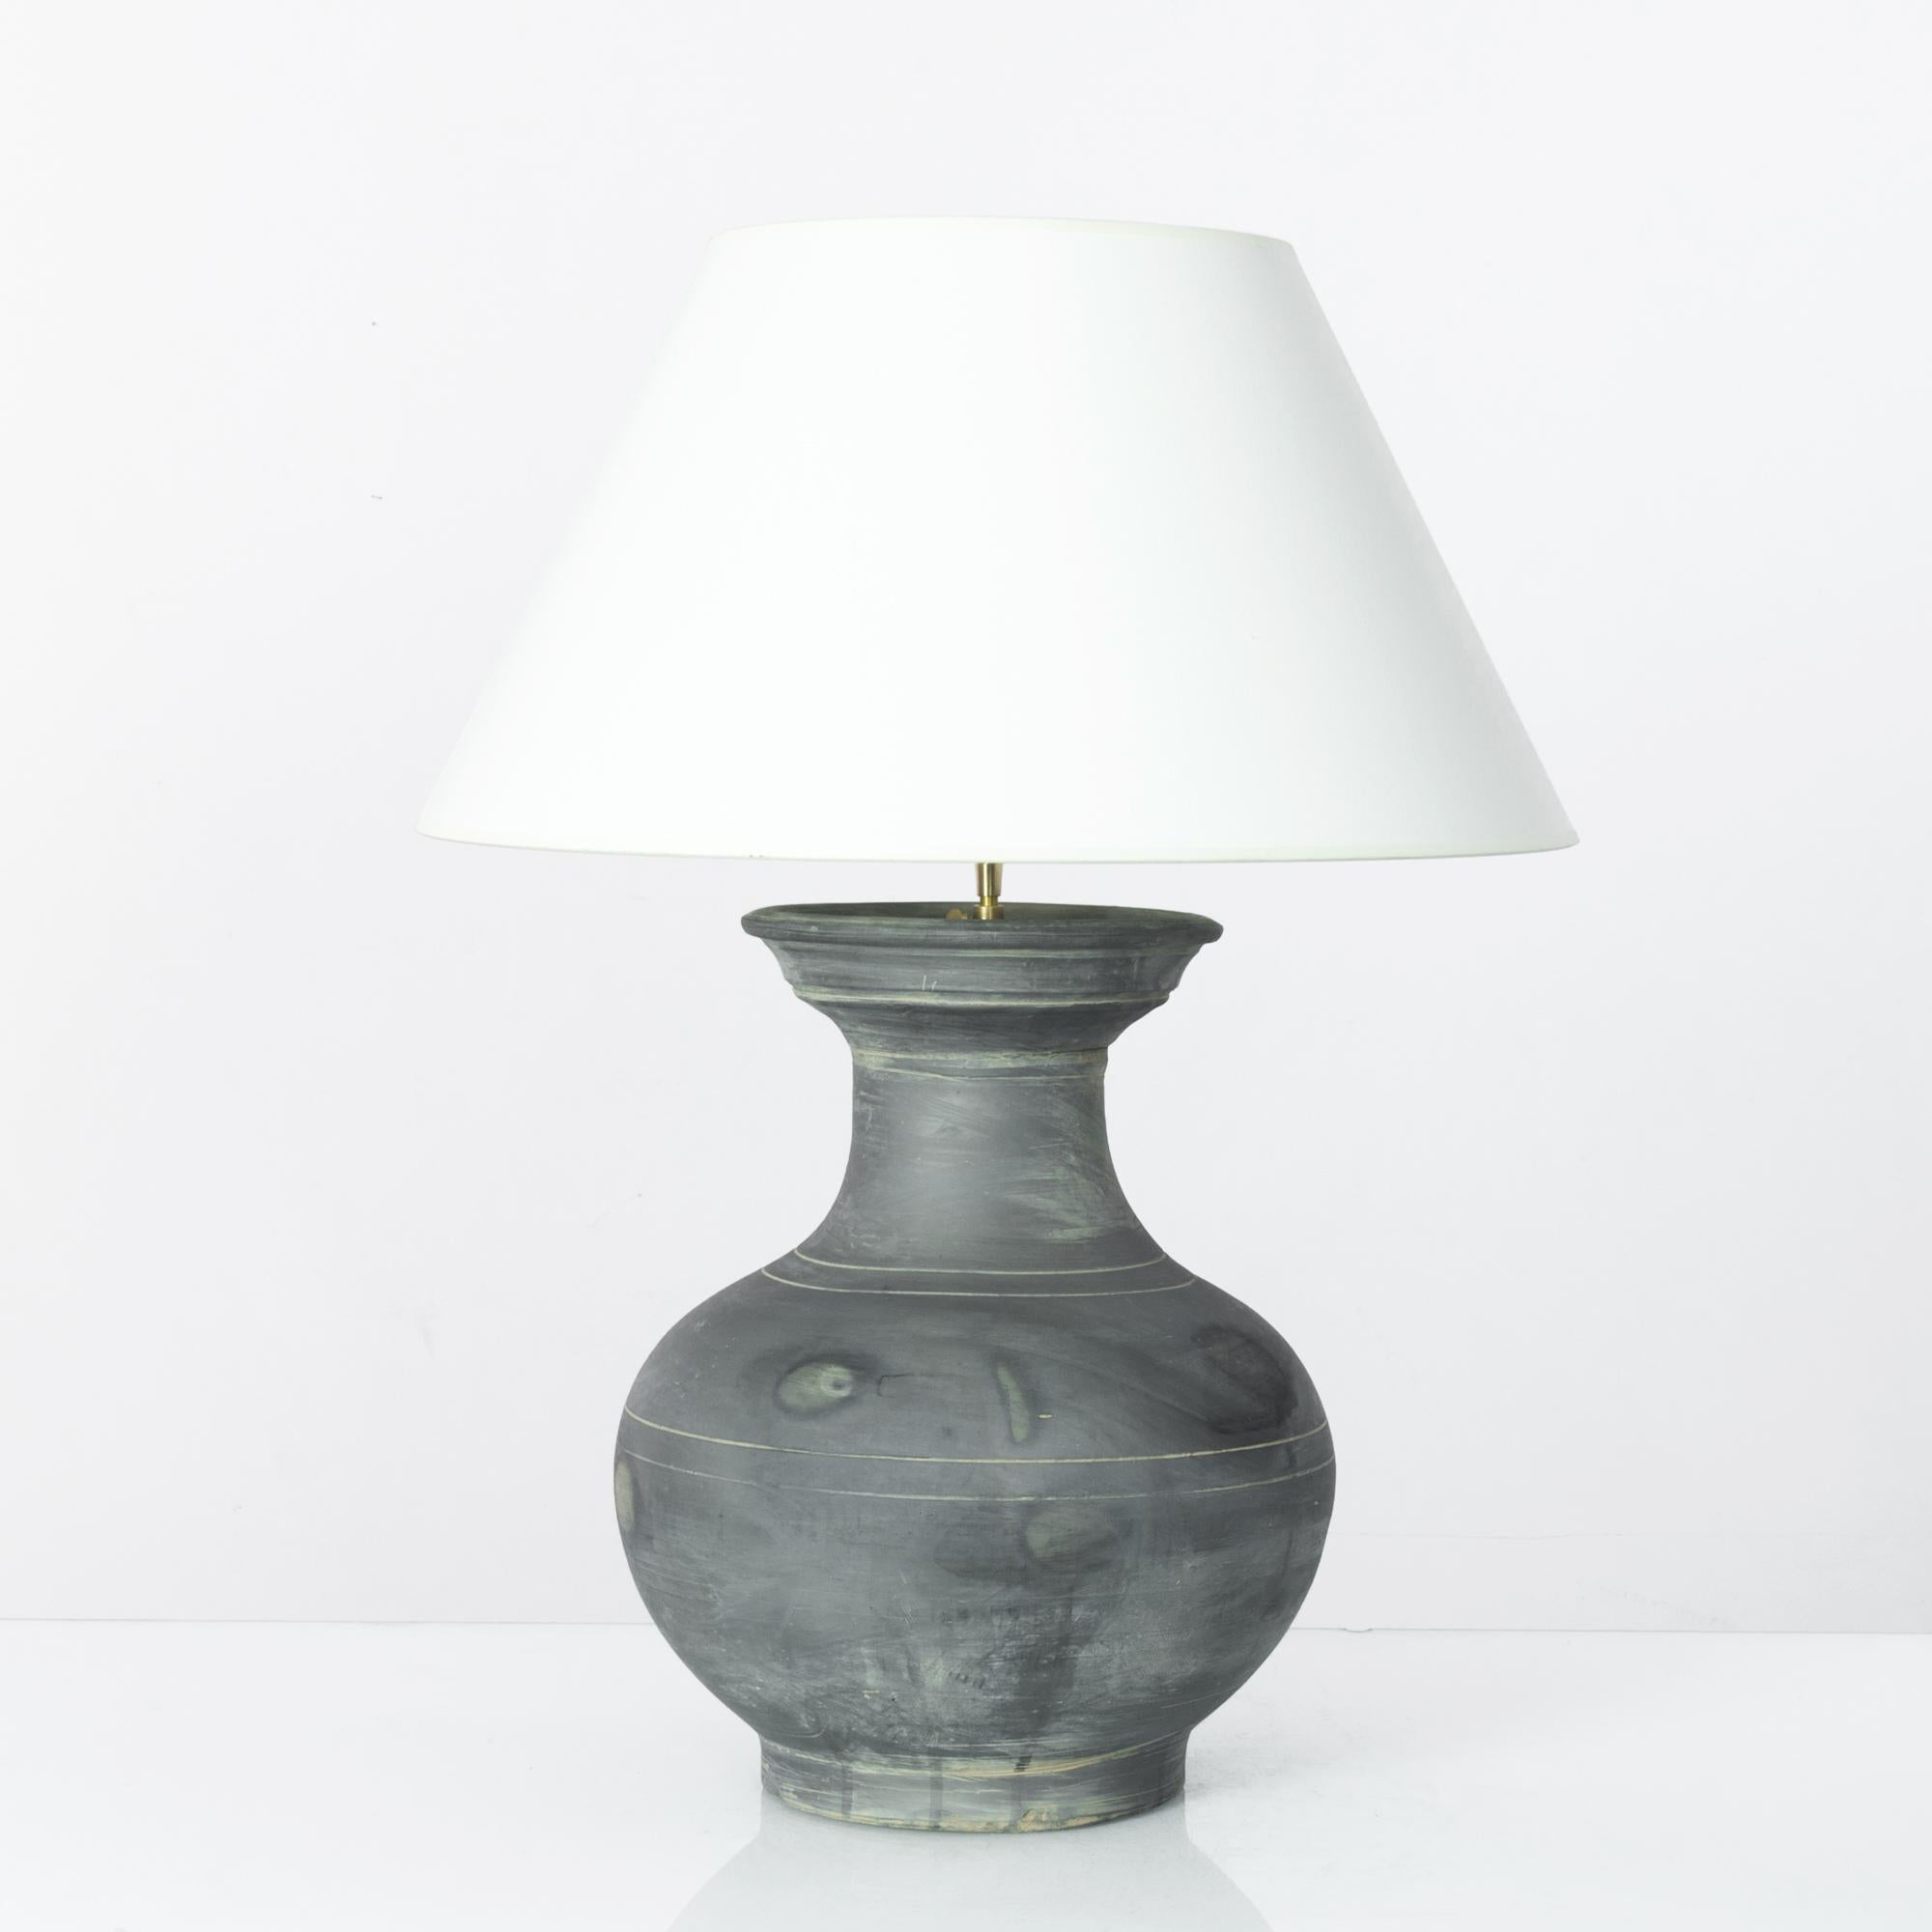 A vintage Chinese vase, fitted with an adjustable brass fixture and E26 lighting socket. The smoky grey glaze and incised lines create a vivid visual impact. Textured glazes, attractive colors and organic shape grants a sensuous tactility to the